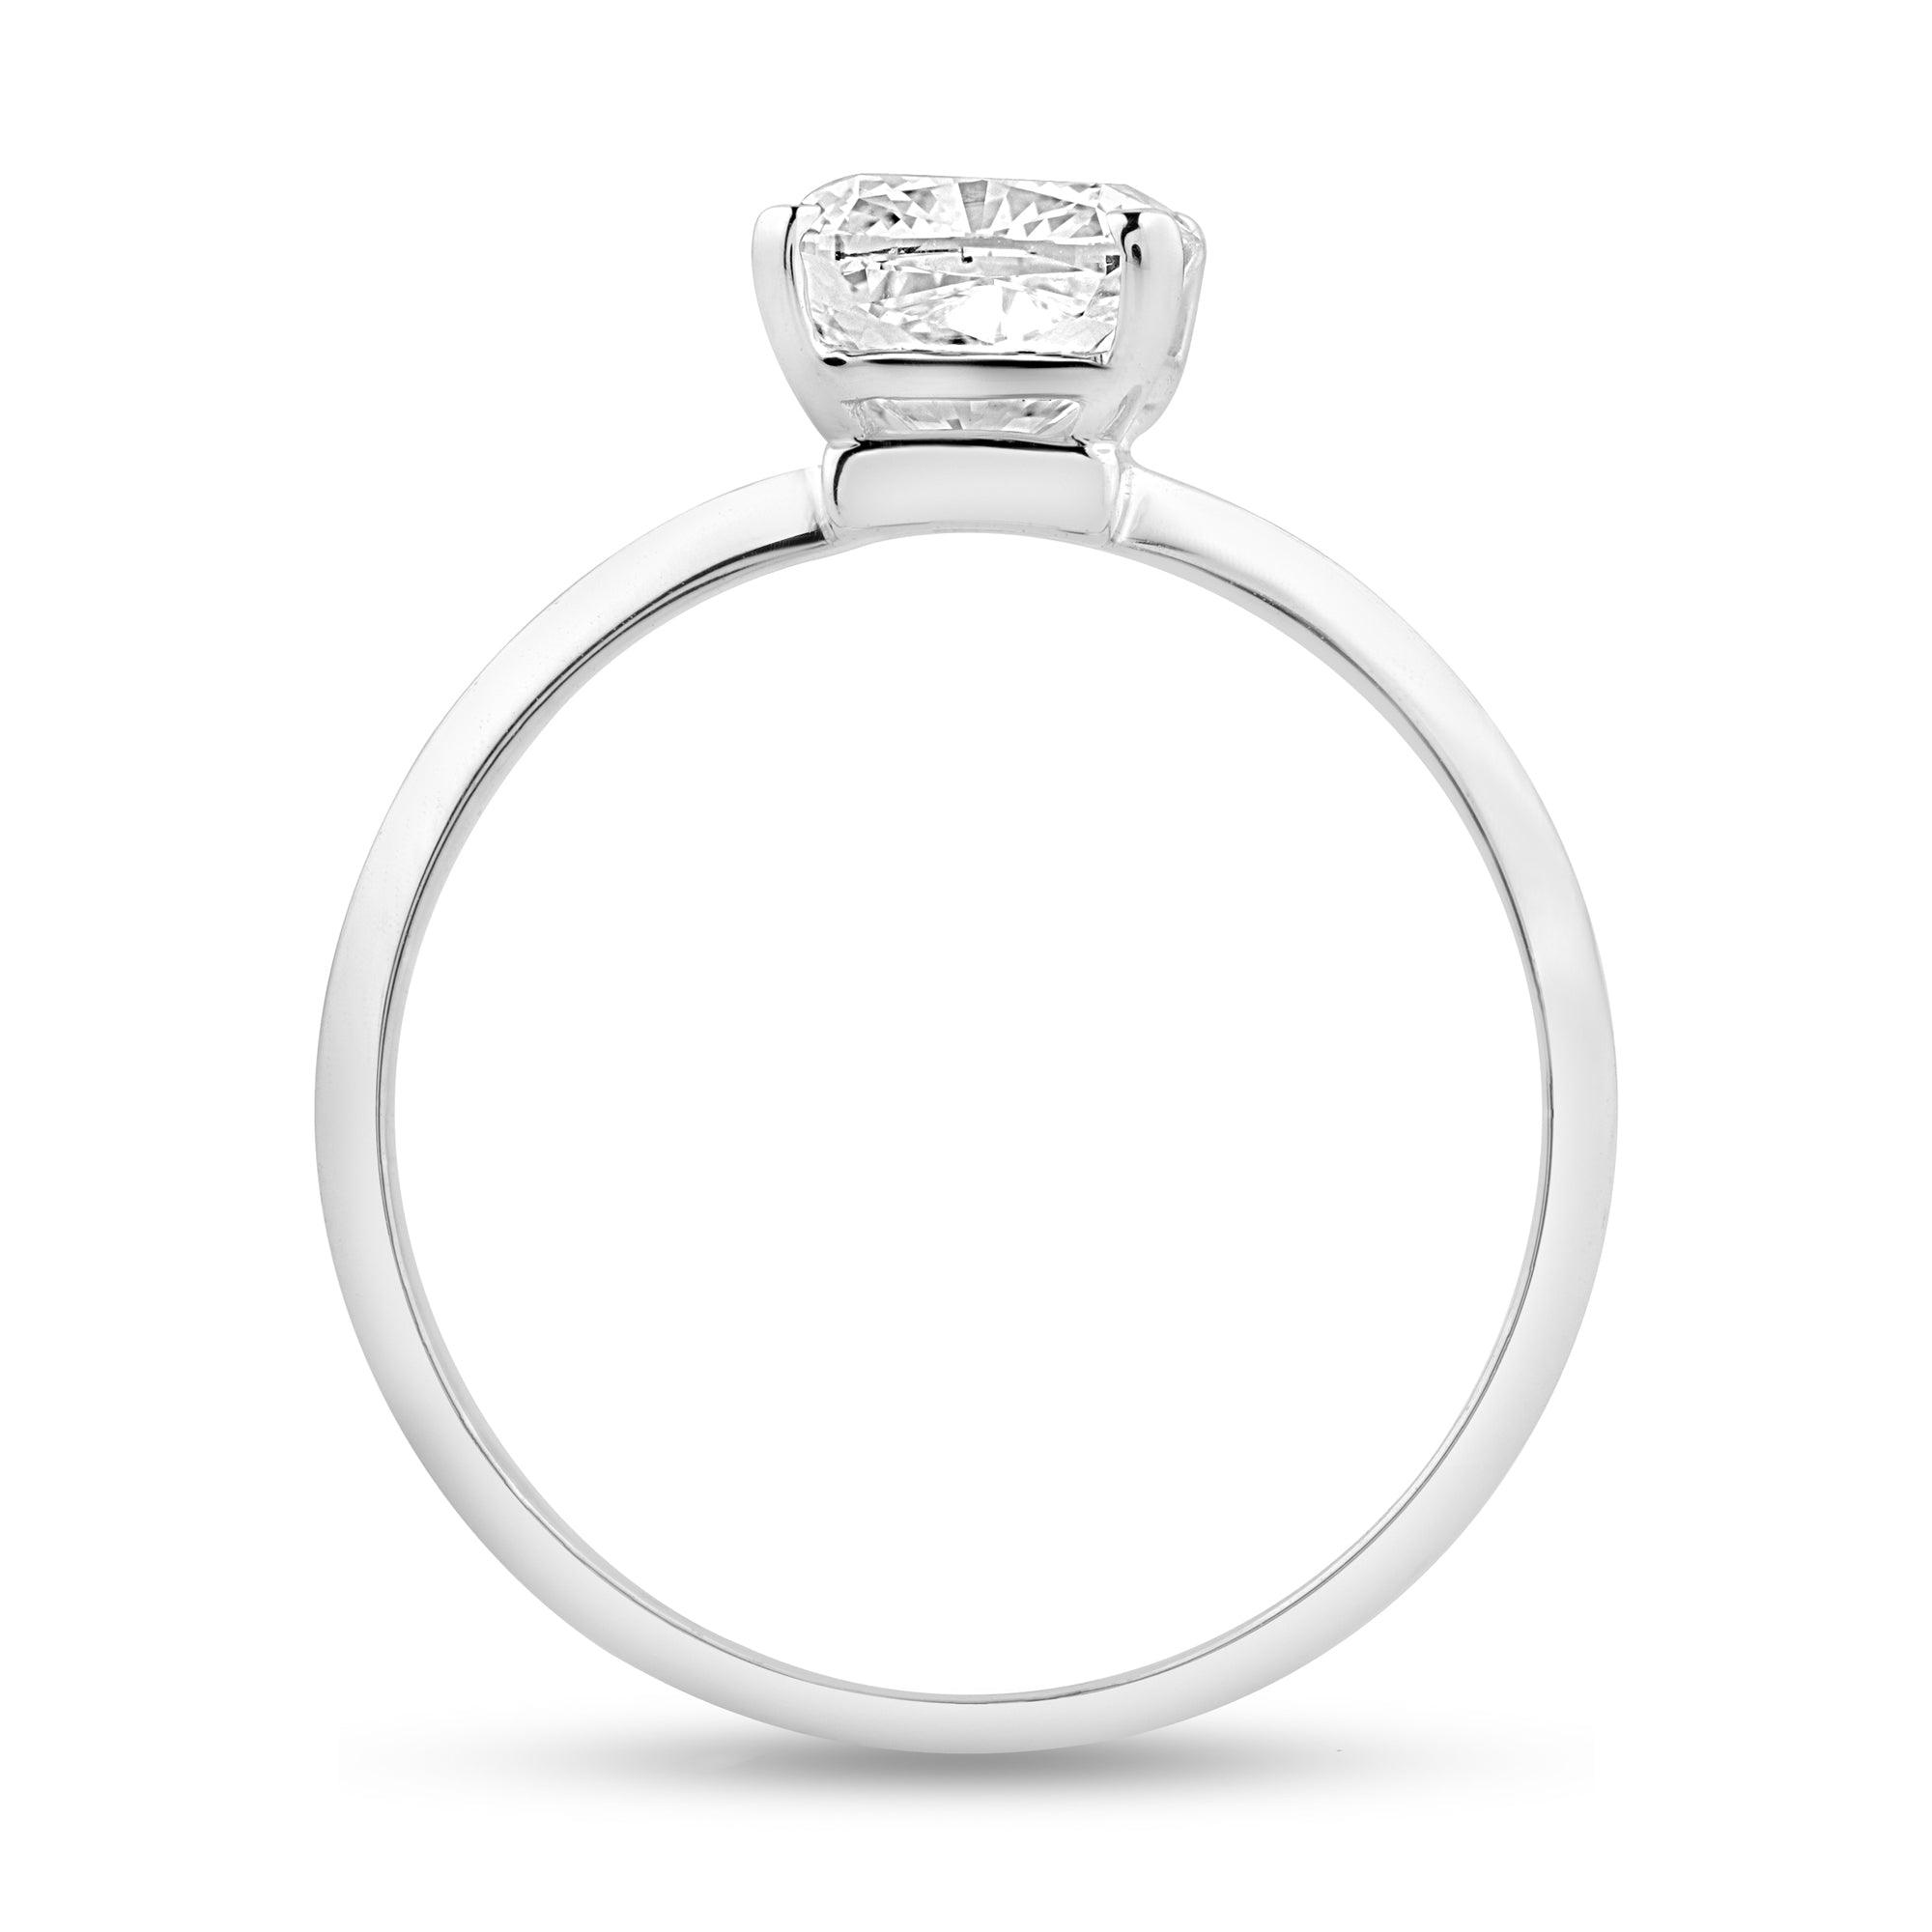 Moissanite Solitaire Ring with 1.25ct Cushion Center Stone - Harmony Bound